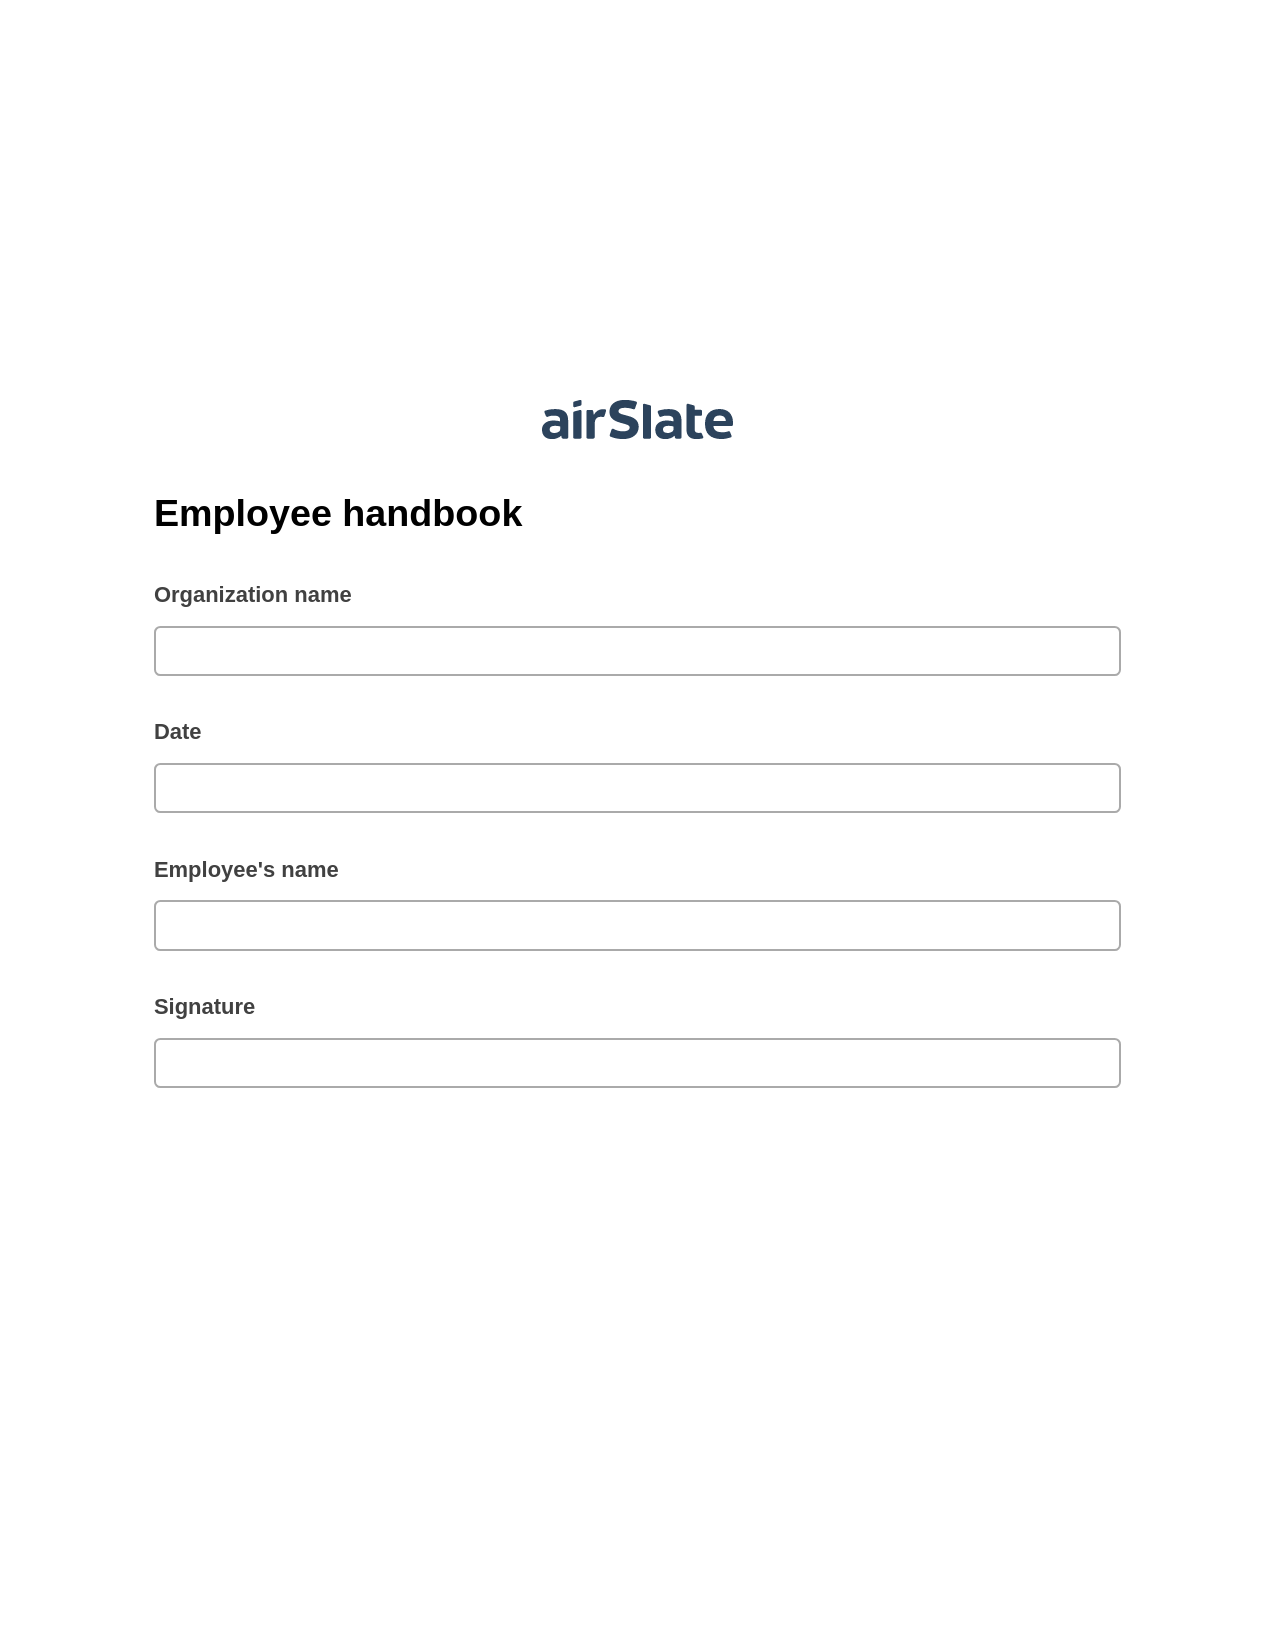 Employee handbook Pre-fill Dropdowns from CSV File Bot, Create Salesforce Record Bot, Export to Formstack Documents Bot